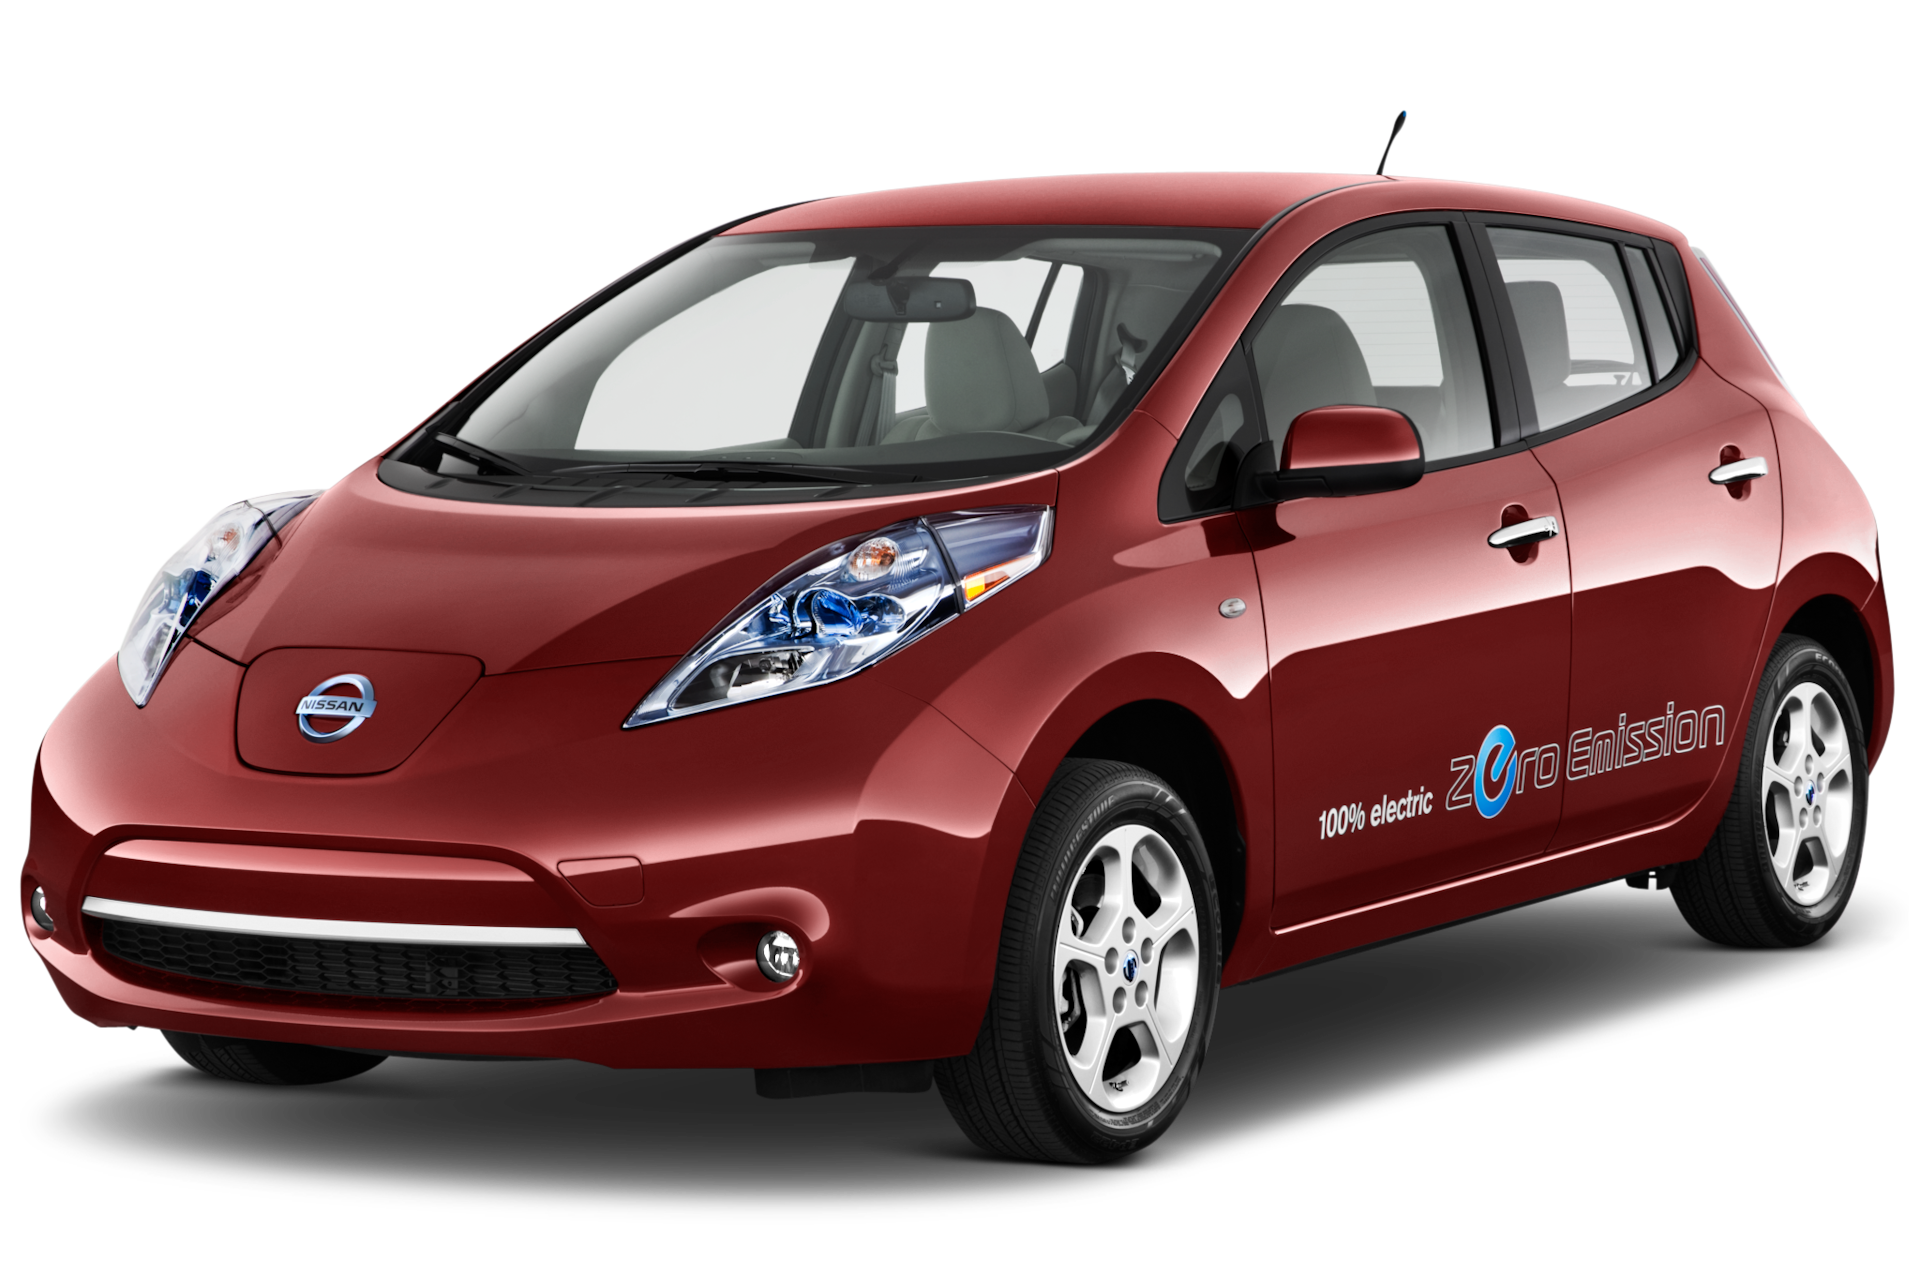 2014 Nissan LEAF Prices, Reviews, and Photos - MotorTrend